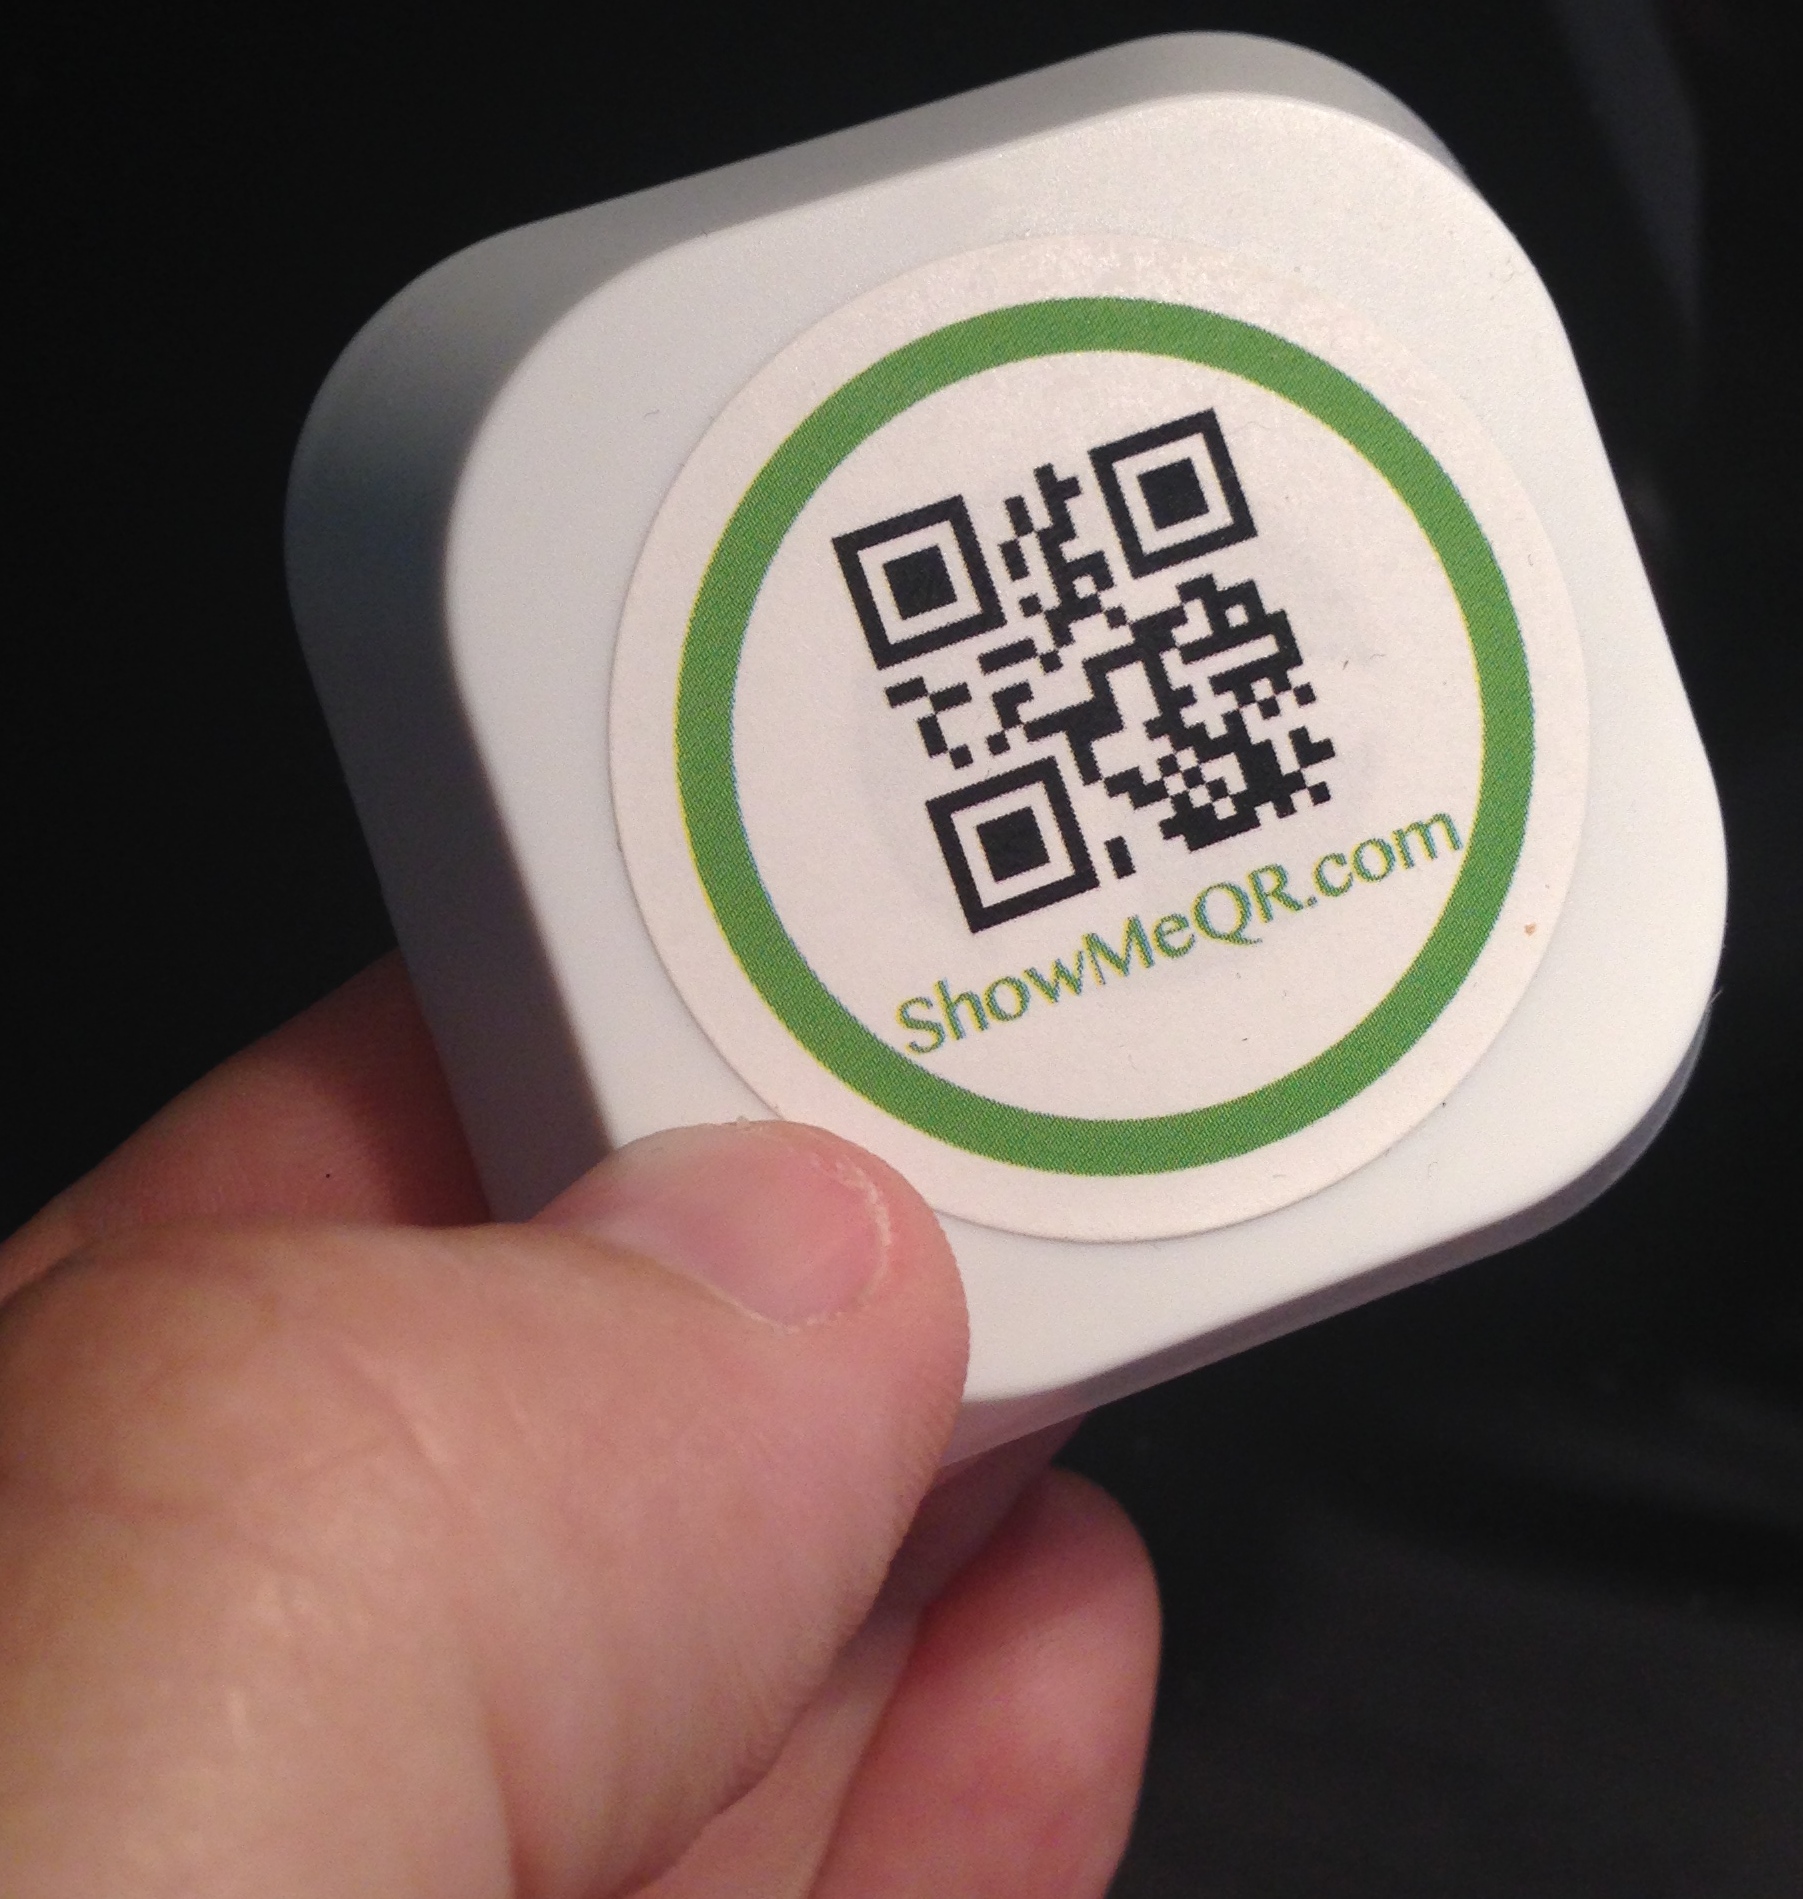 The printed proprietary QR codes can be placed on (or near) objects.